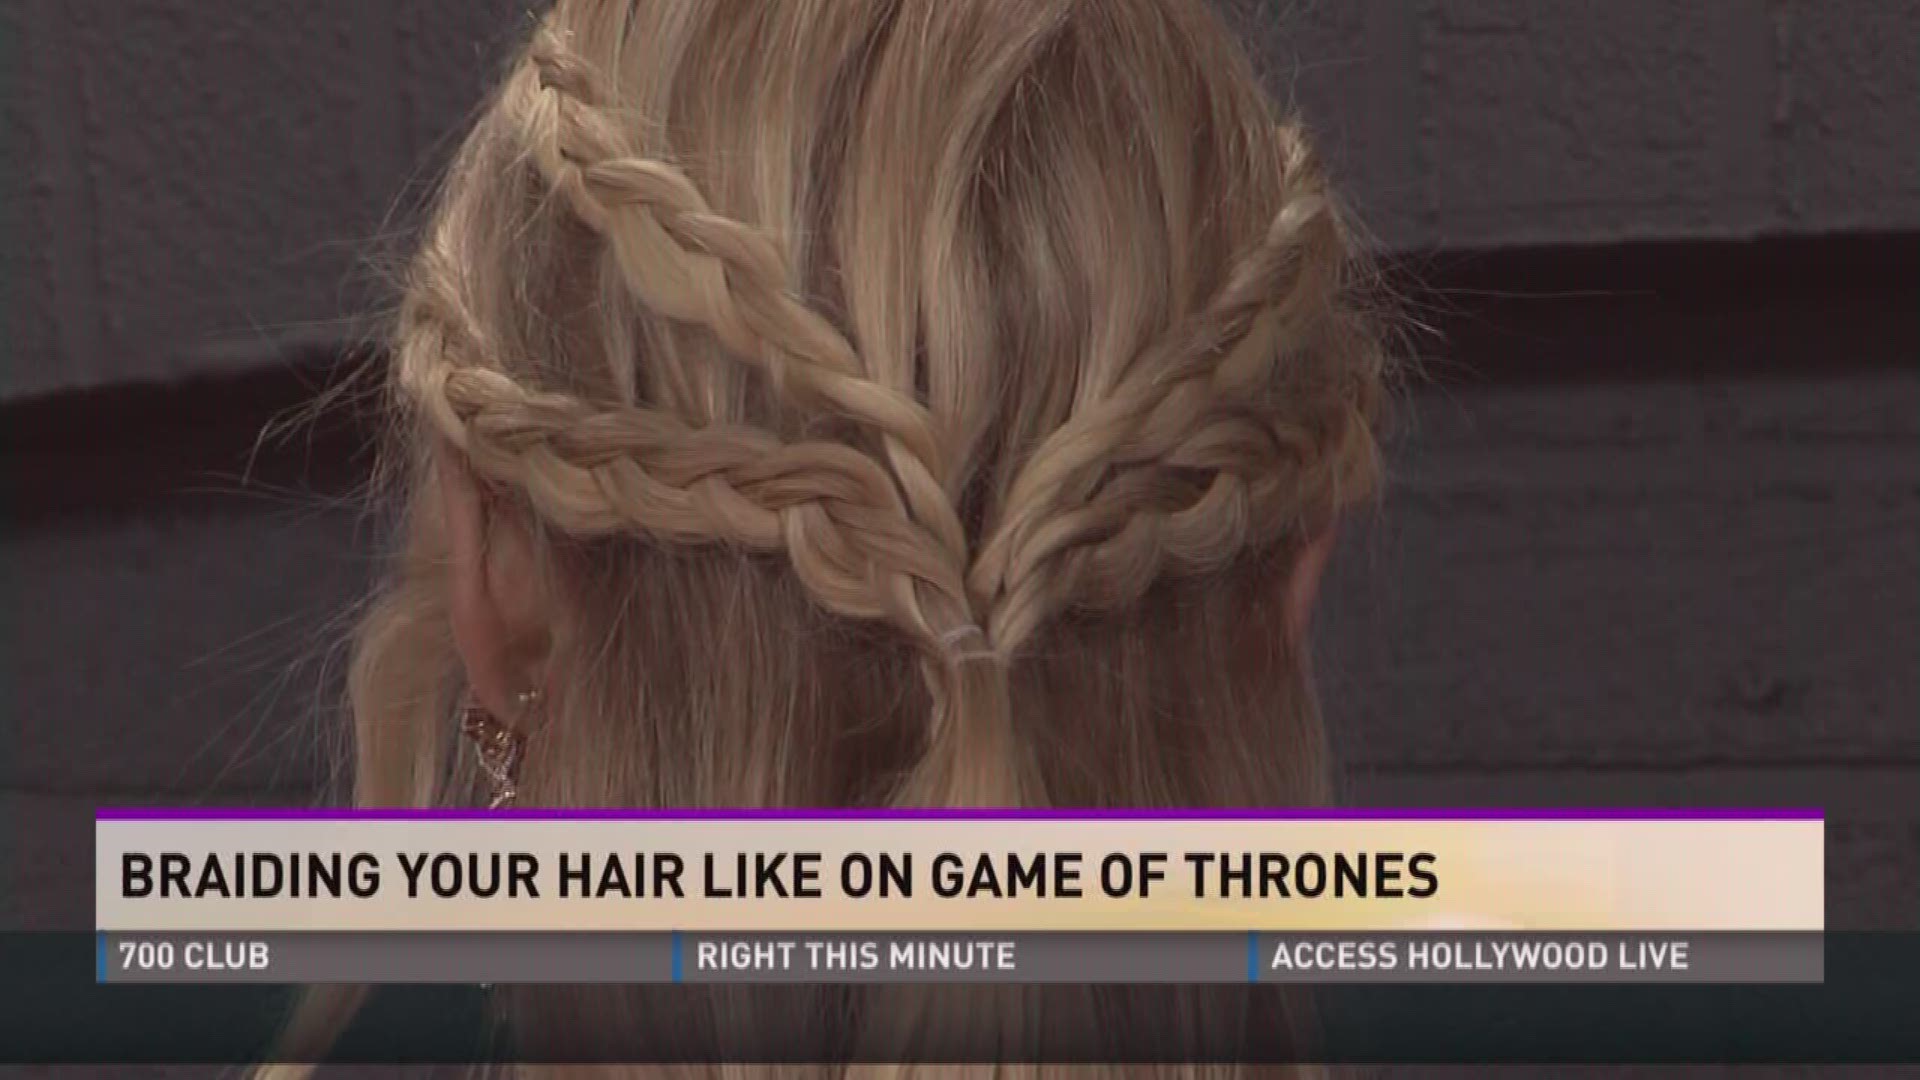 Braiding Your Hair Like on Game of Thrones pt. 2